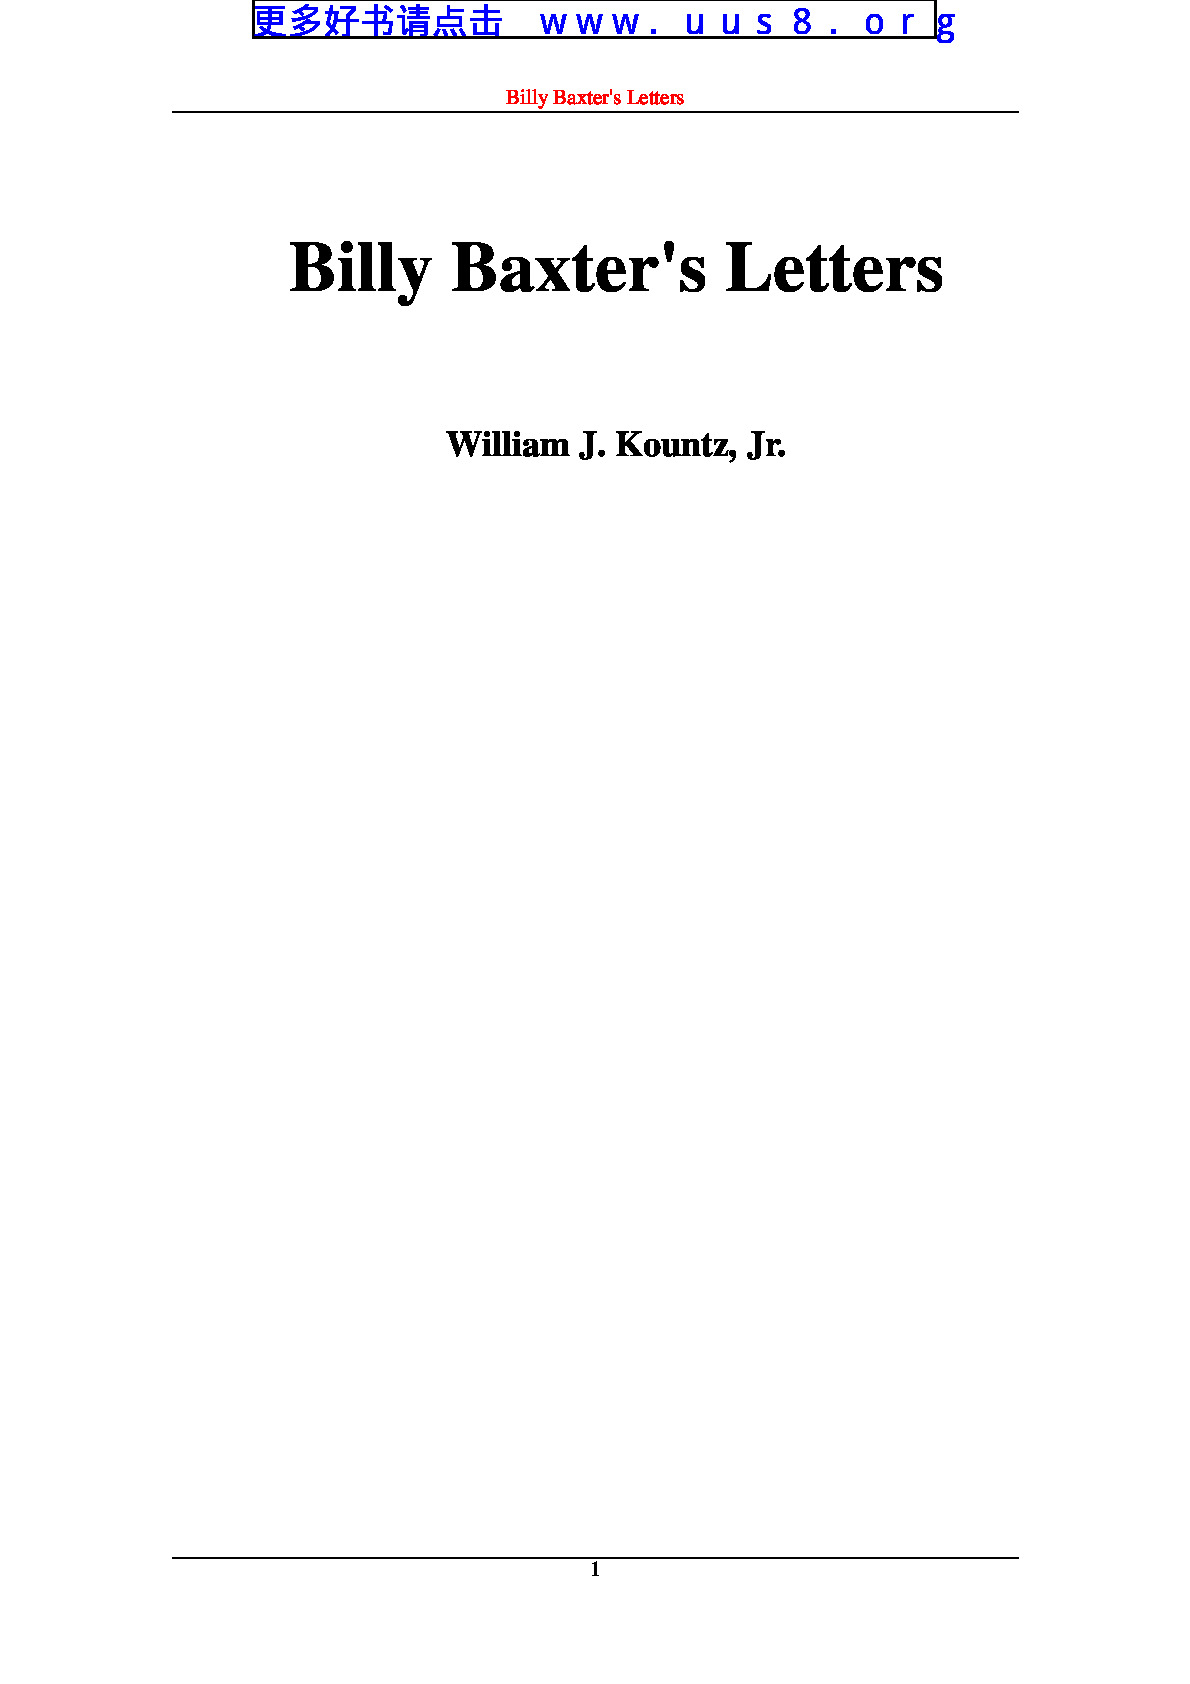 billy_baxter’s_letters(比利巴克斯特书信)